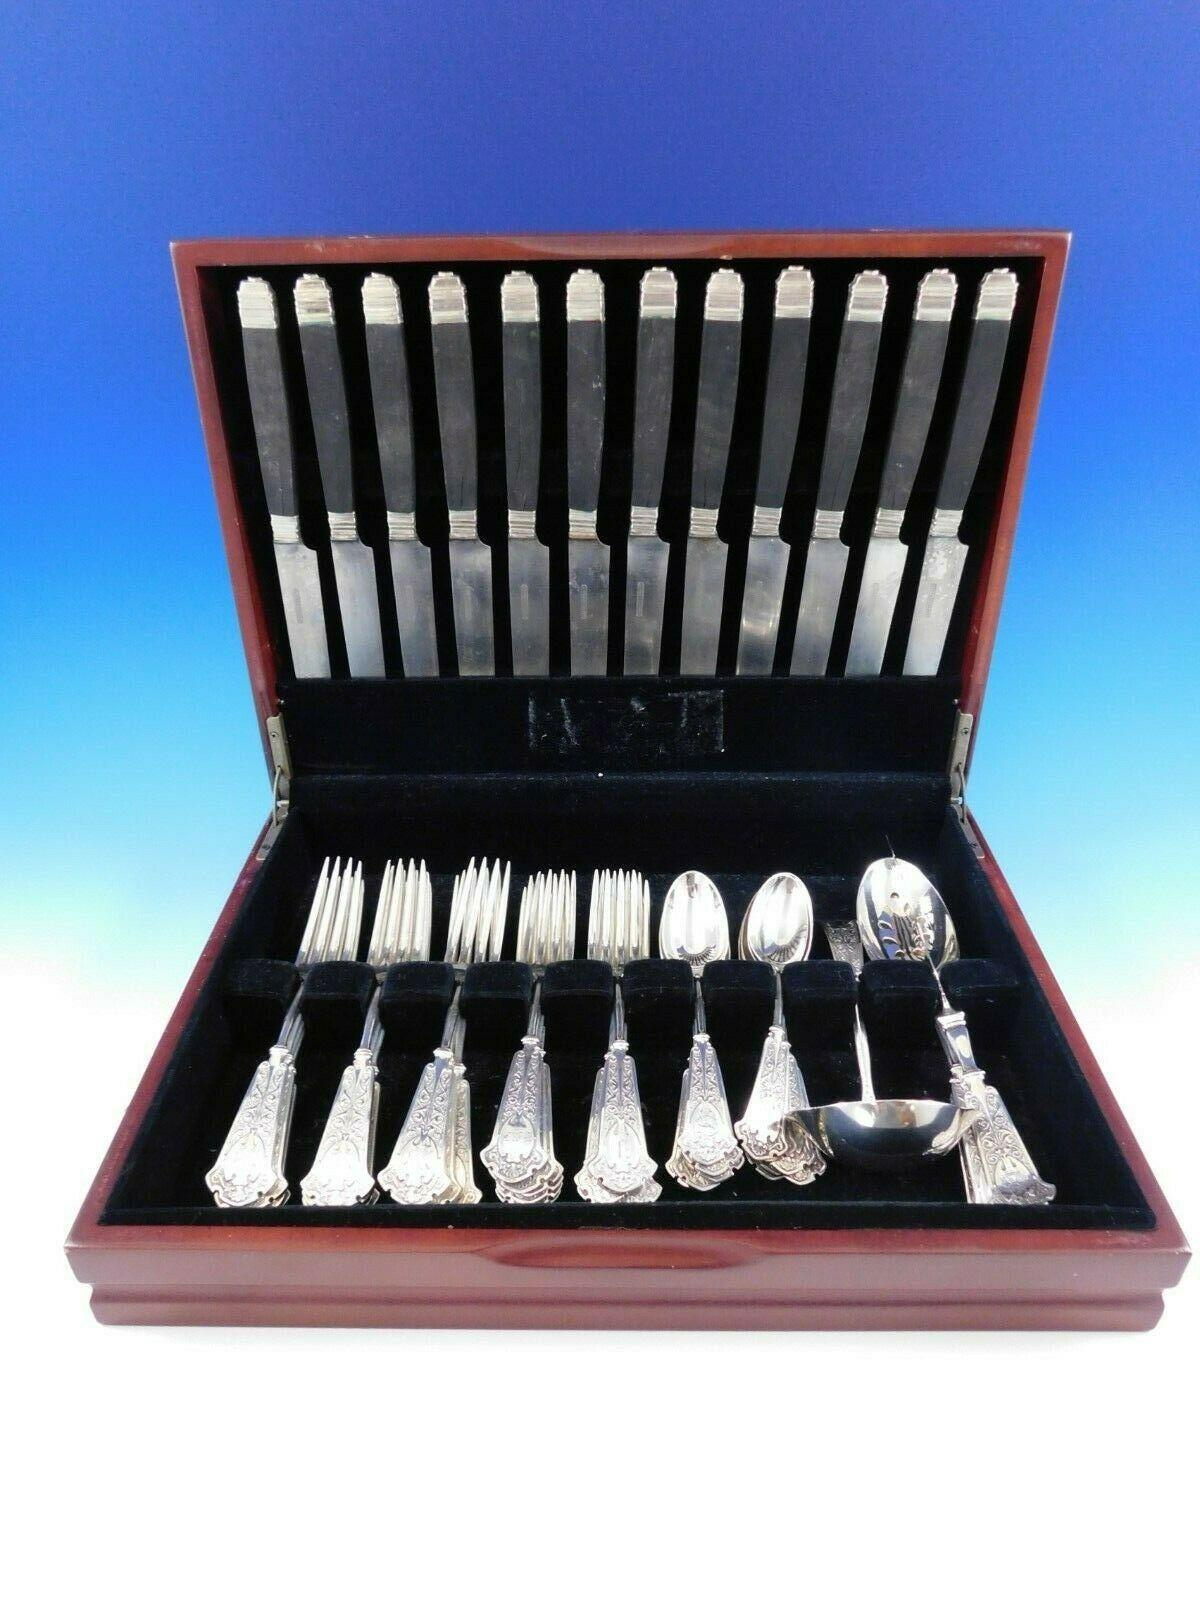 Rare Moresque by Wendt sterling silver flatware set - 52 pieces, circa 1873. This set includes:

12 Dinner knives, Ebony handles, 9 3/4